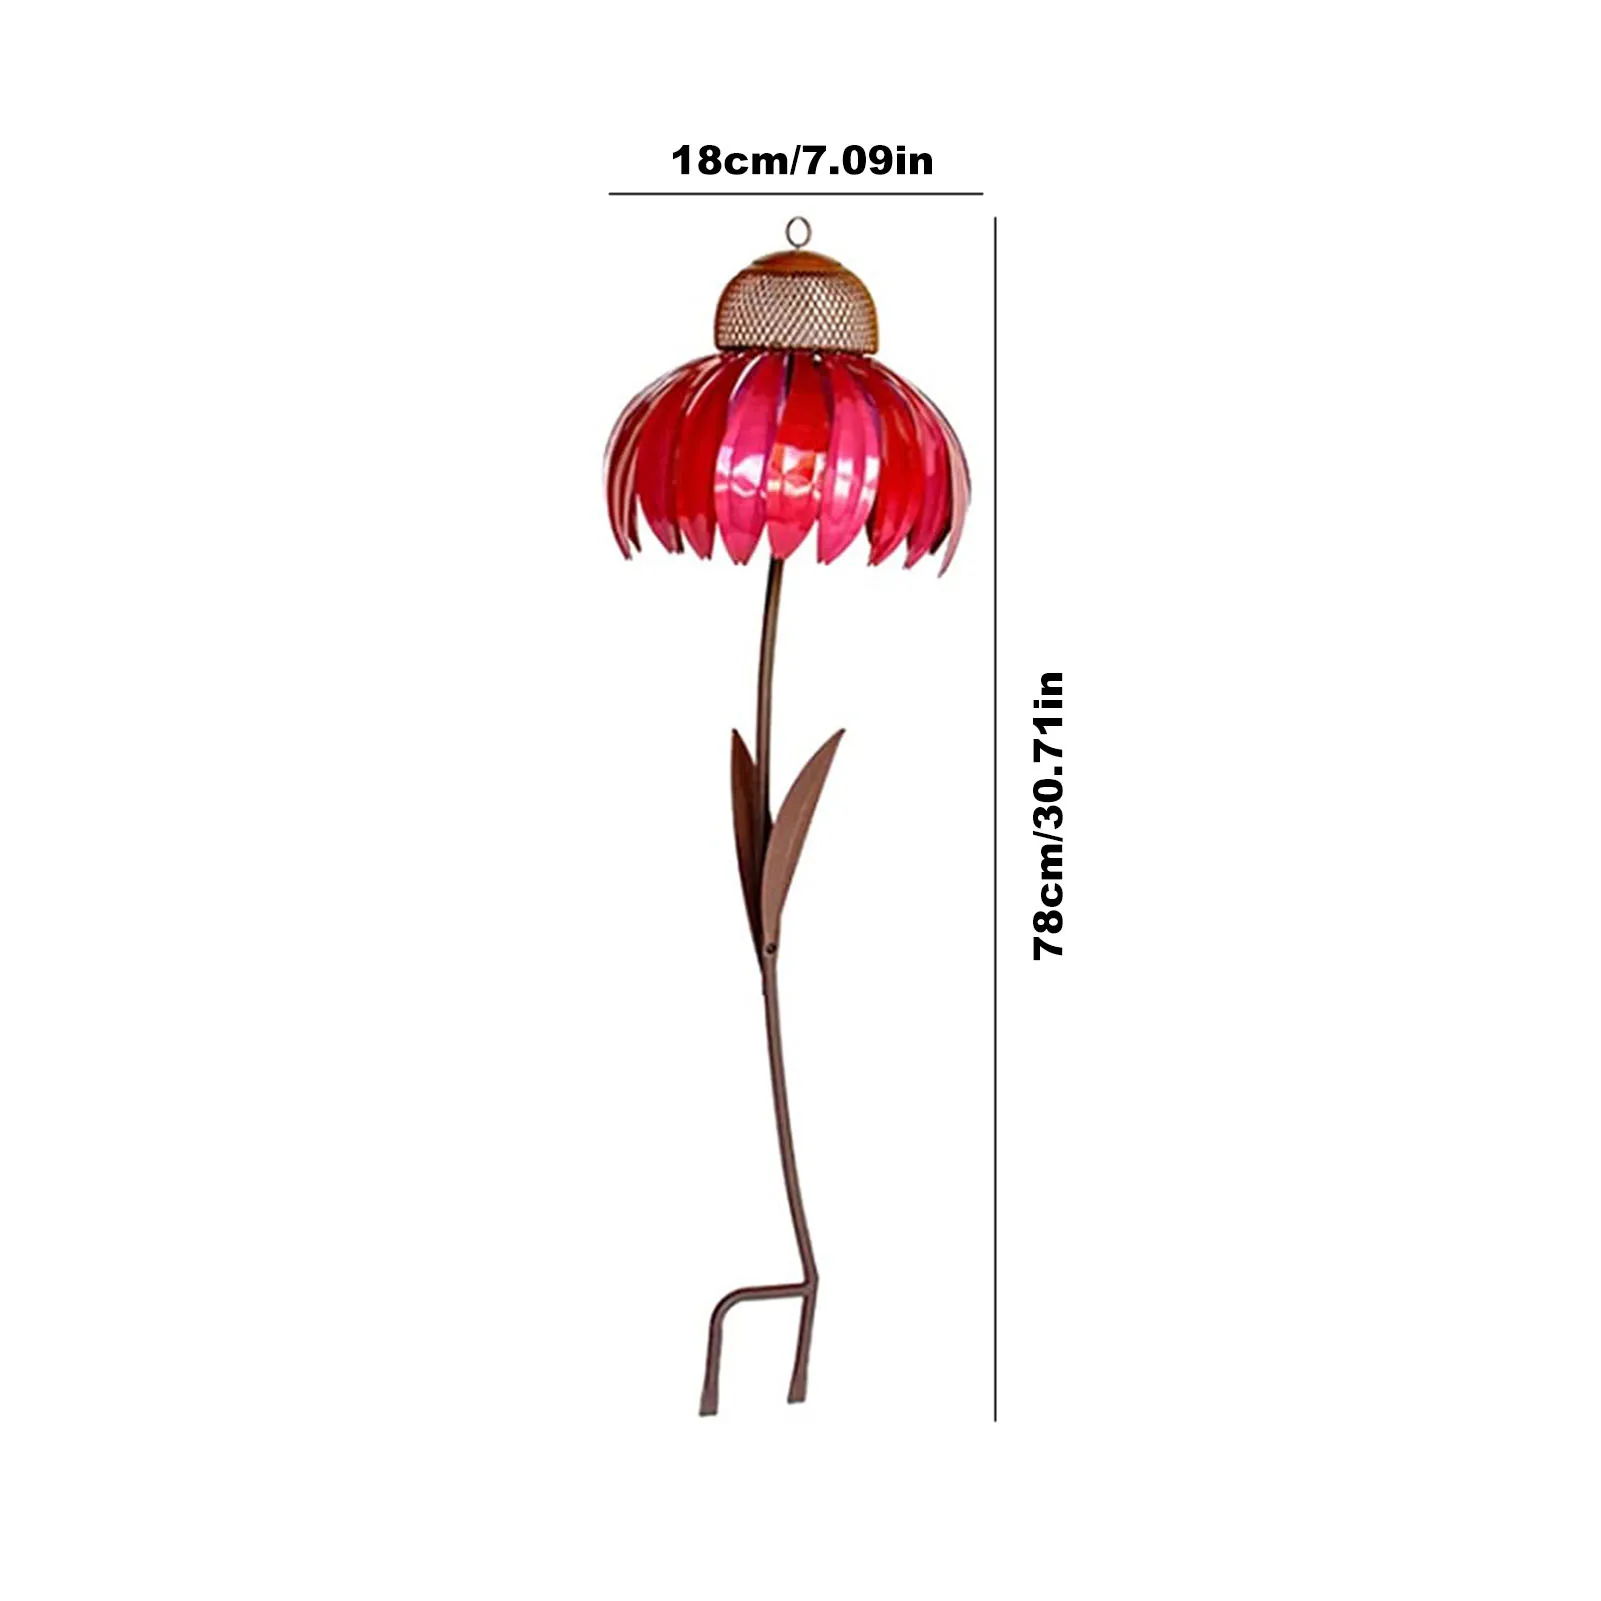 

1PCS Coneflower Standing Bird Feeder Rust Resistant Art Metal Bird Feeder With Stand Flower Stakes For Outside Garden Decoration